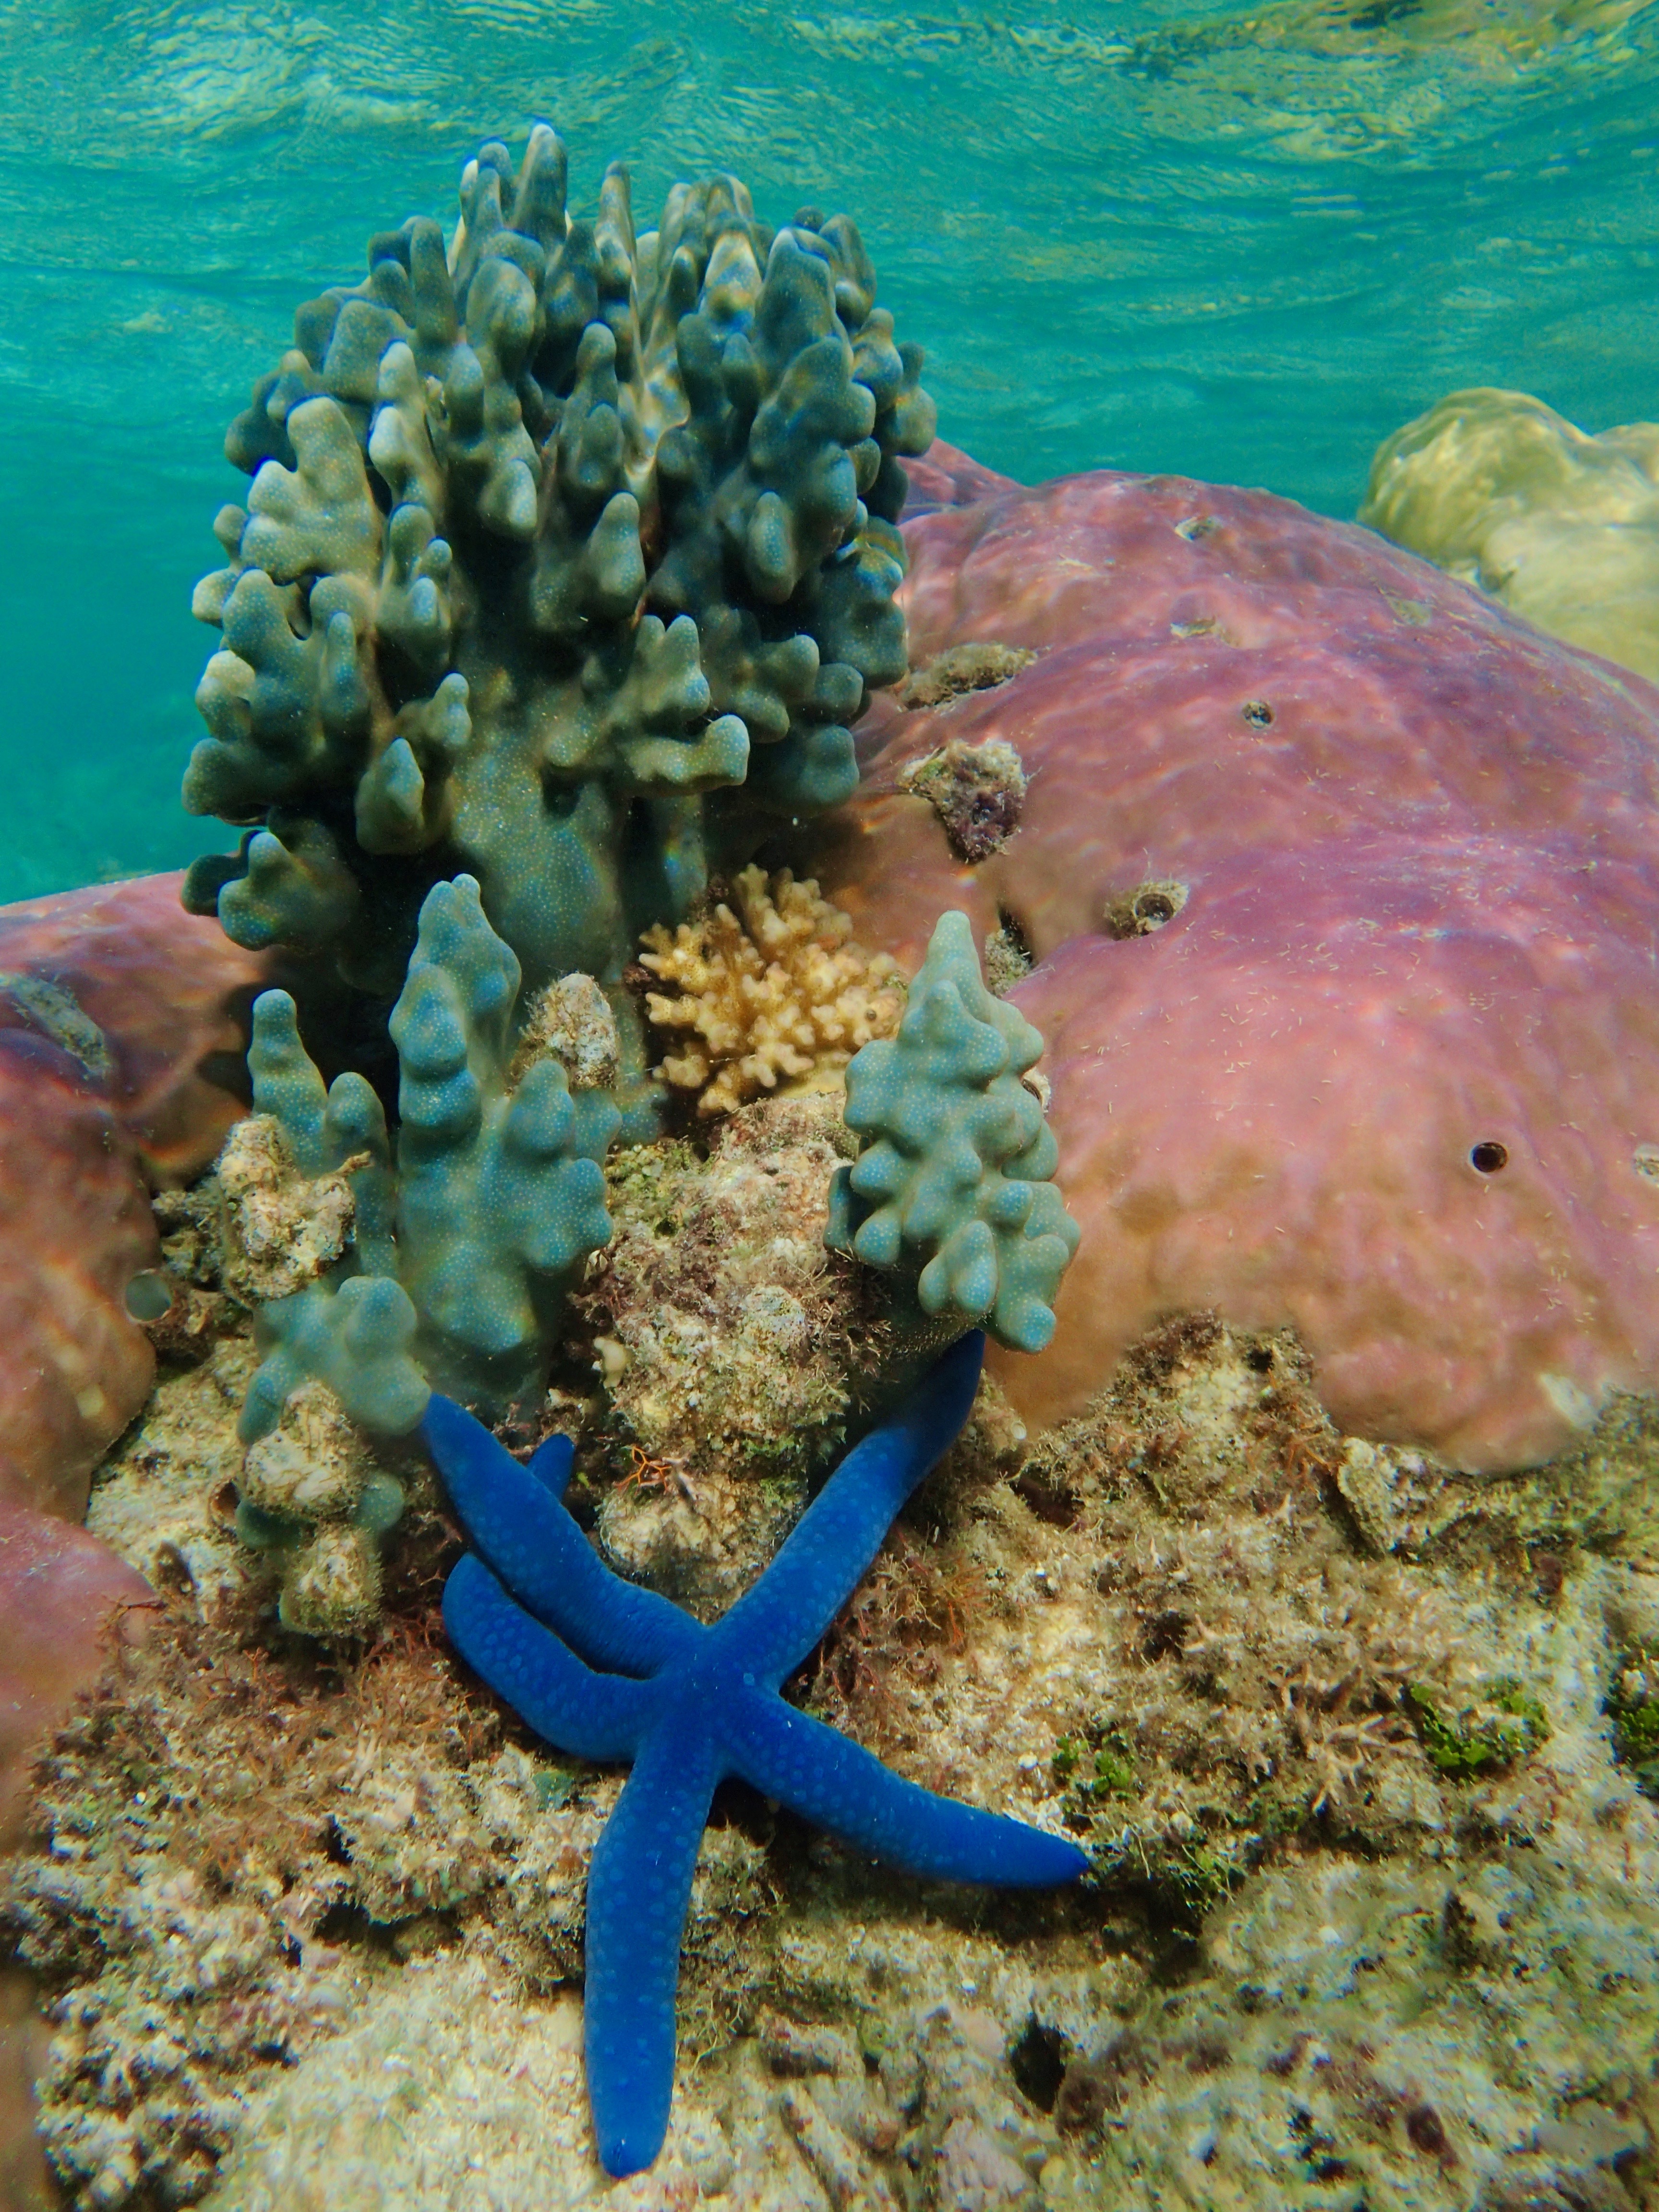 Blue Coral with a Not-So-Blue Future